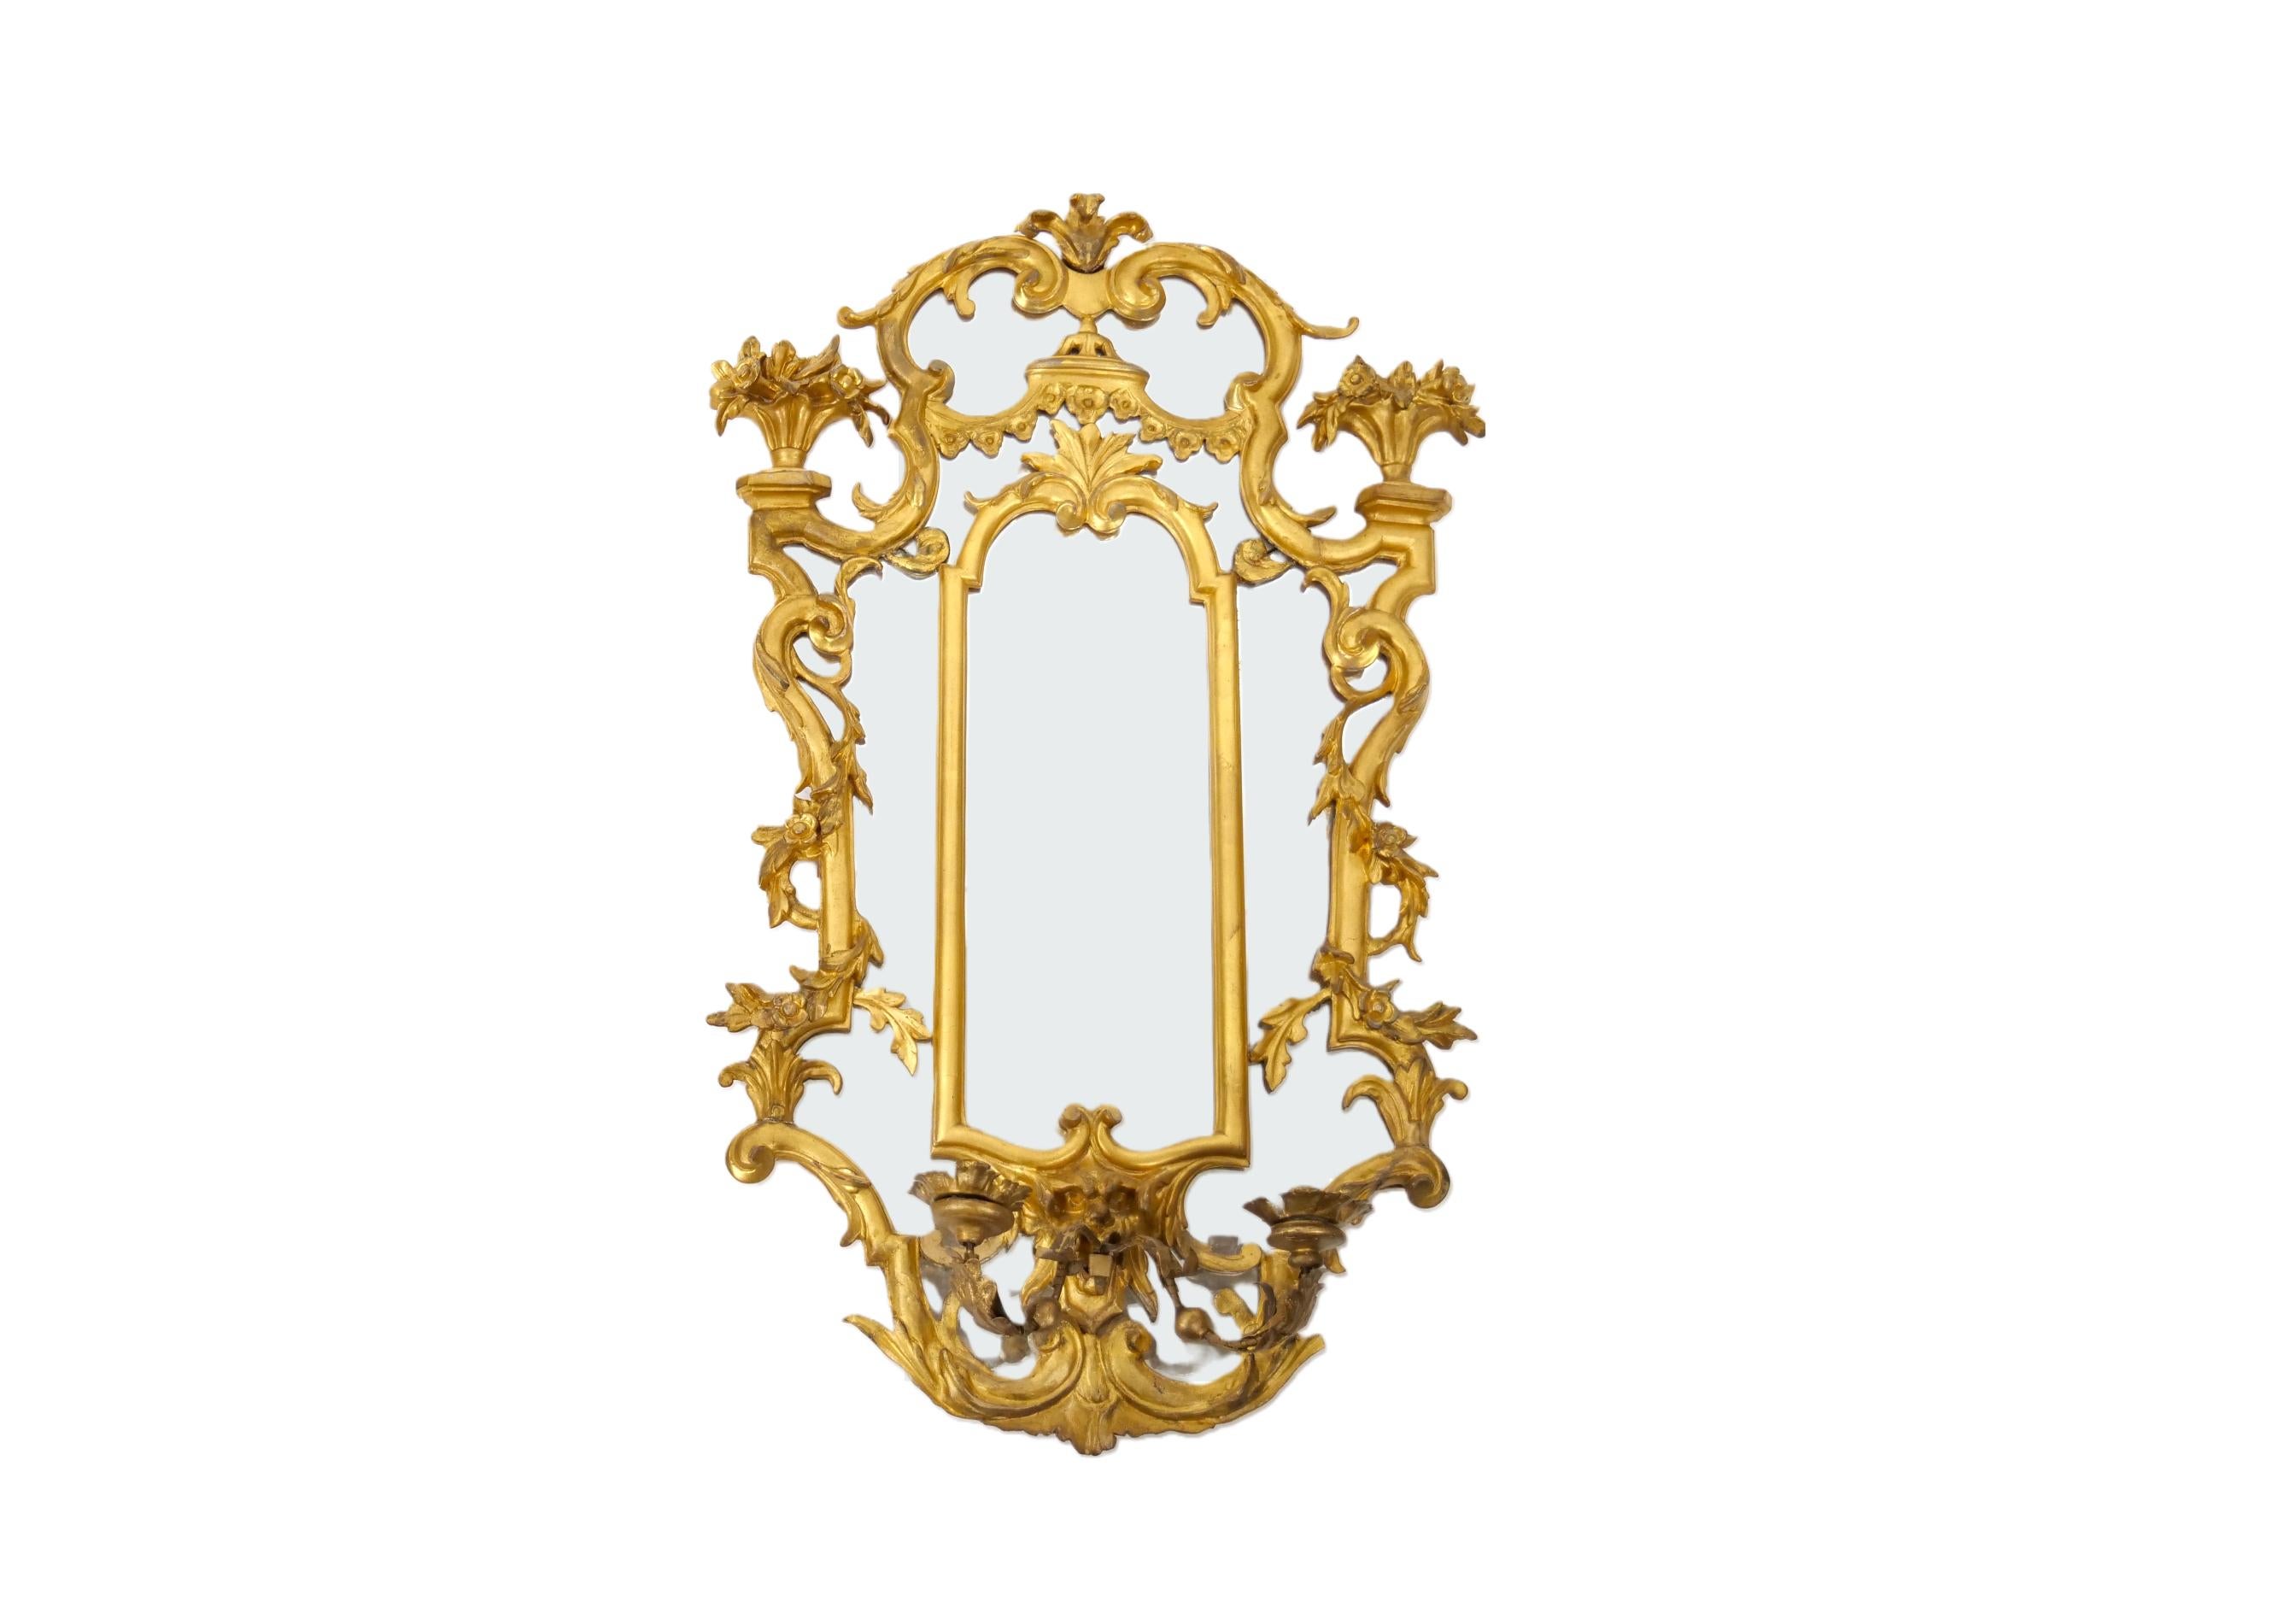 19th century Ornately hand carved gilt wood pair of decorative girandoles hanging wall mirror. Each one is in good condition with appropriate wear consistent with age / use. Each one measure 33 inches high x 23 inches wide x 3 inches deep.